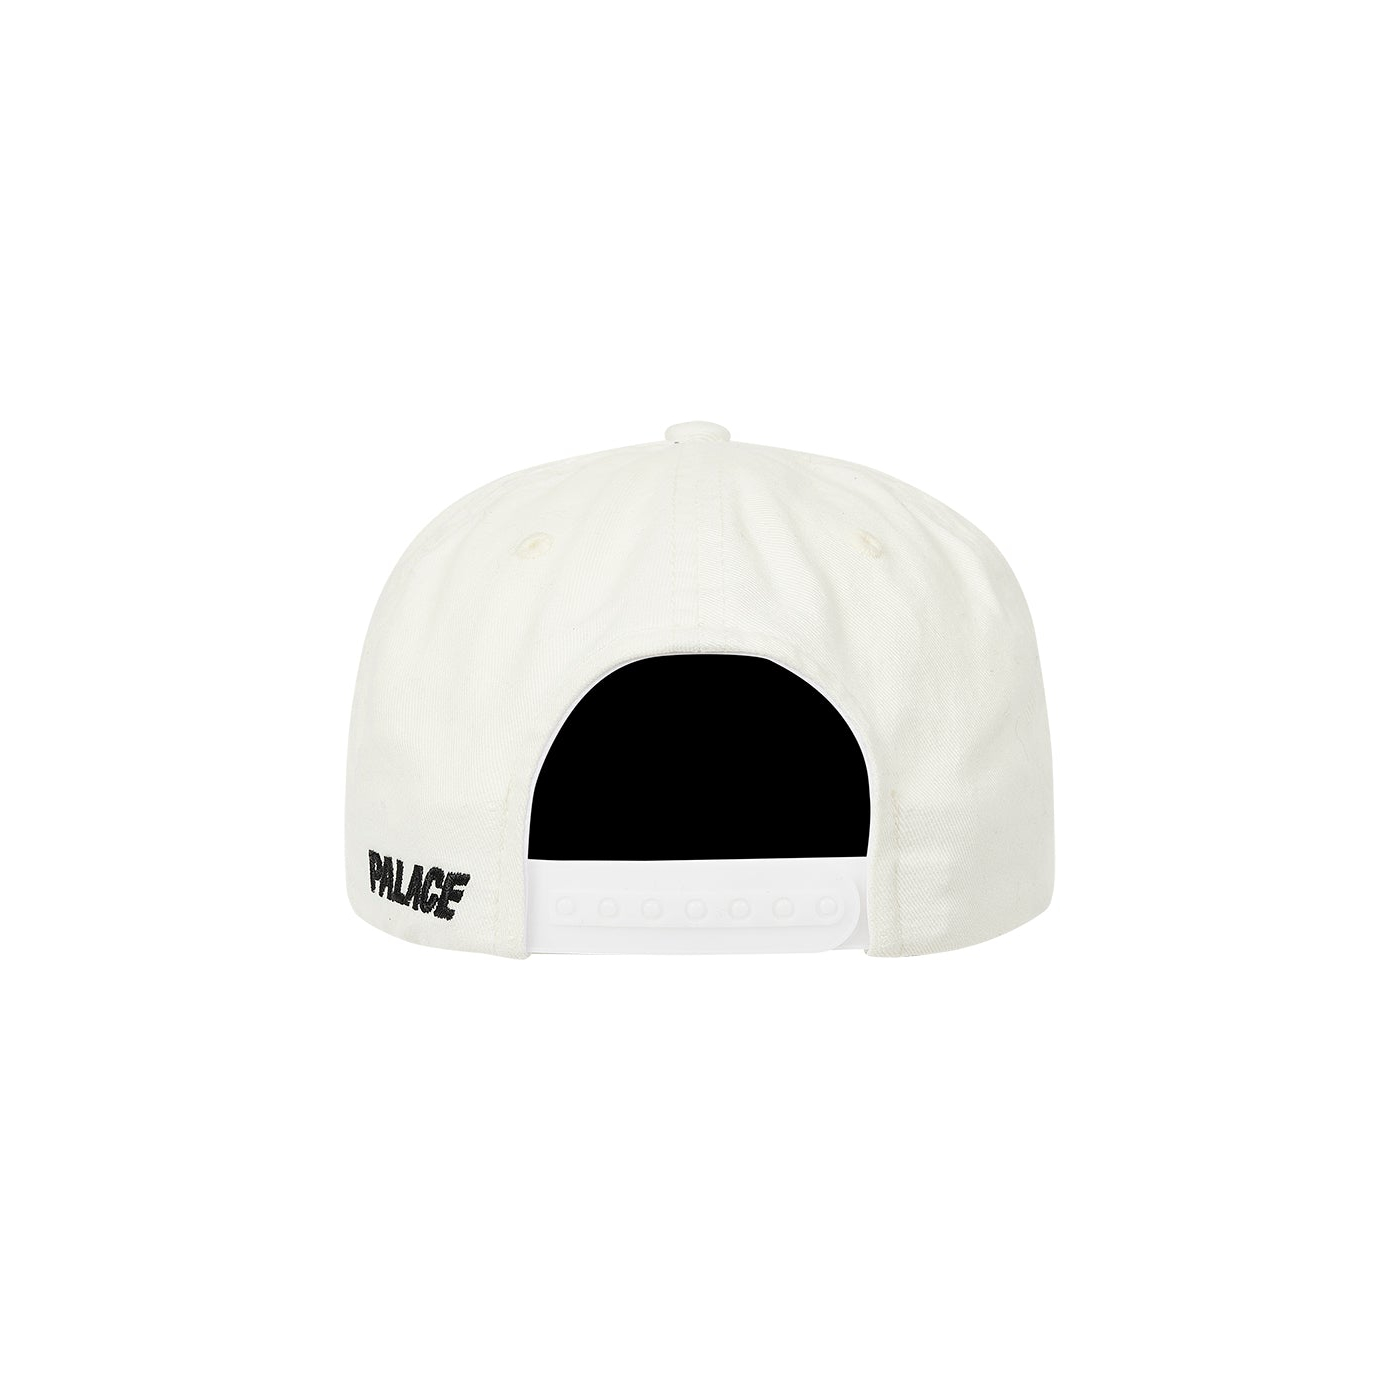 Thumbnail FAUX LEATHER BUNNING MAN SNAPBACK WHITE one color